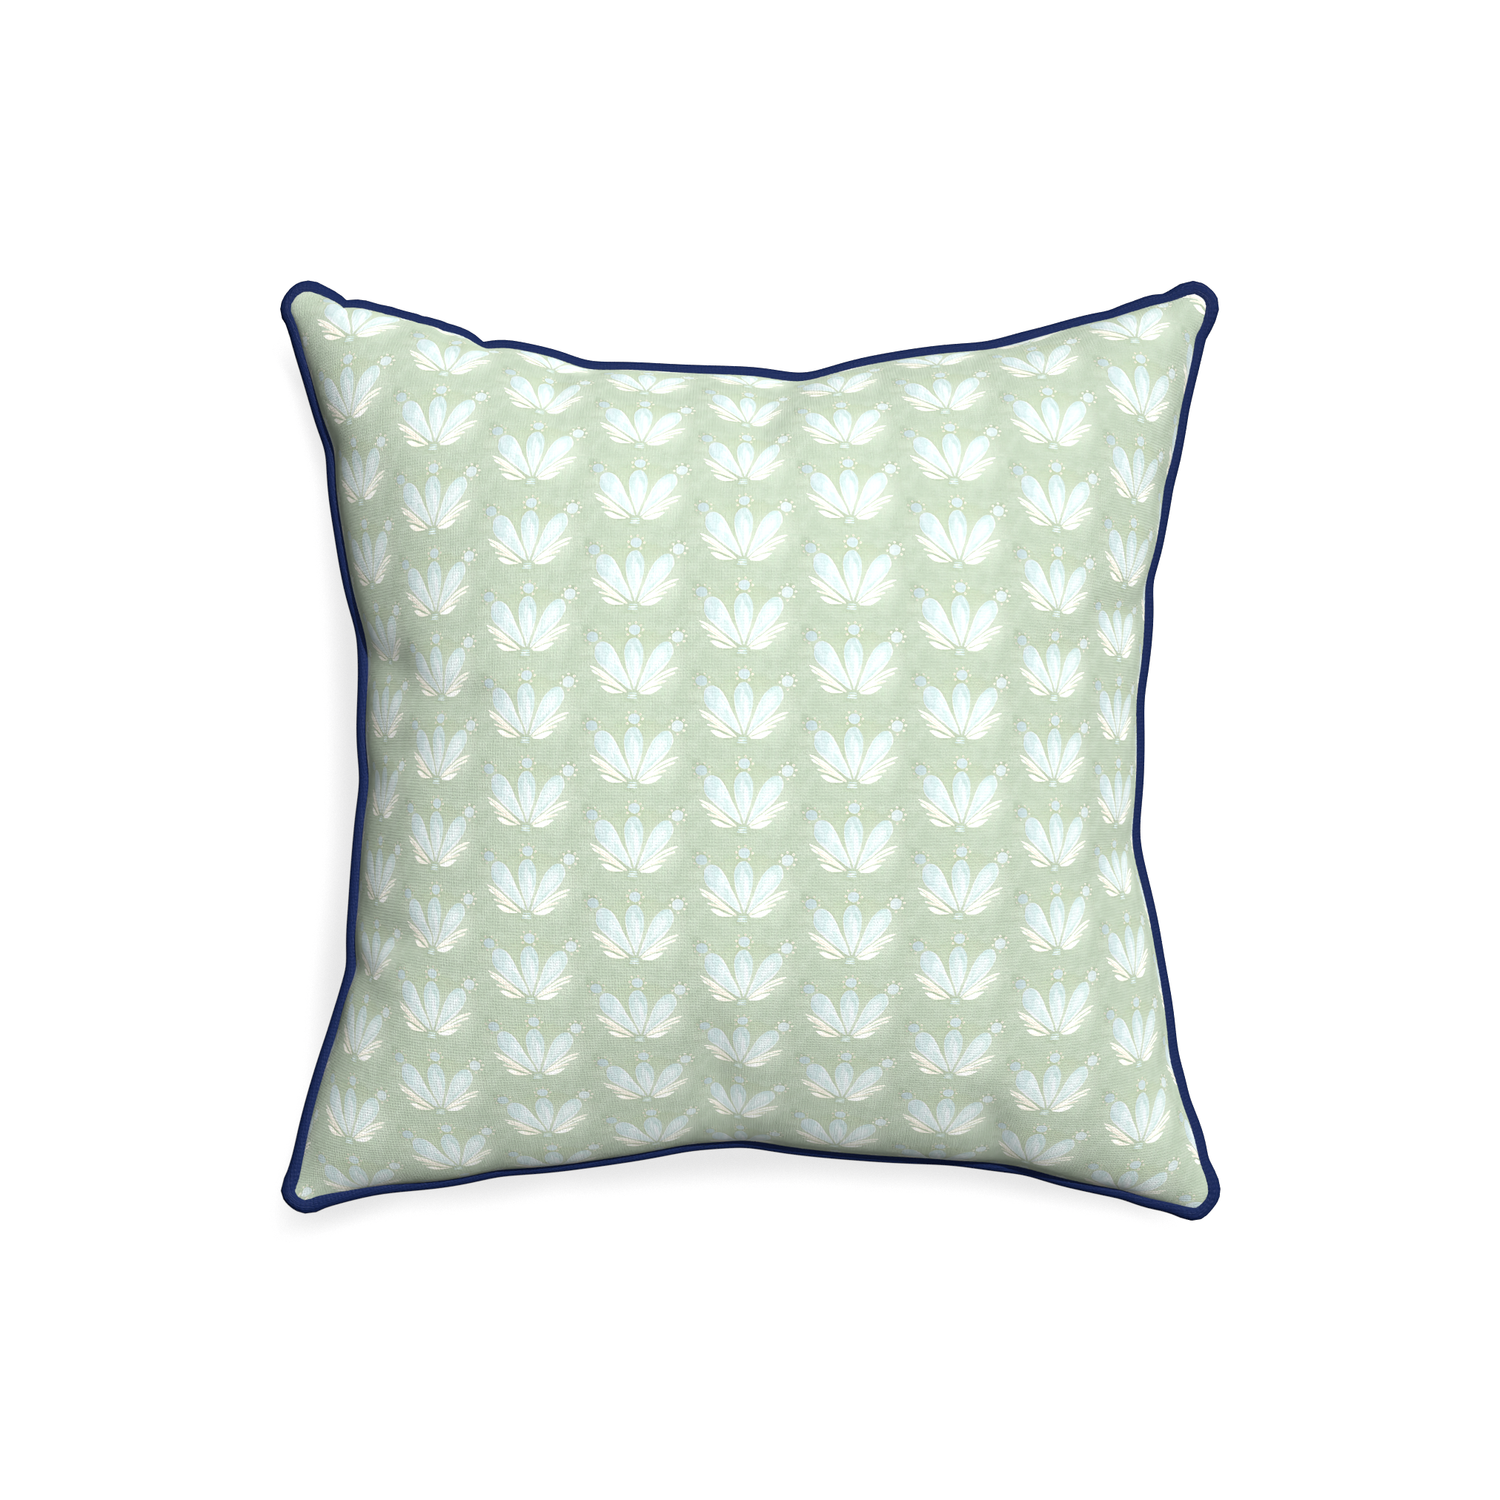 20-square serena sea salt custom pillow with midnight piping on white background